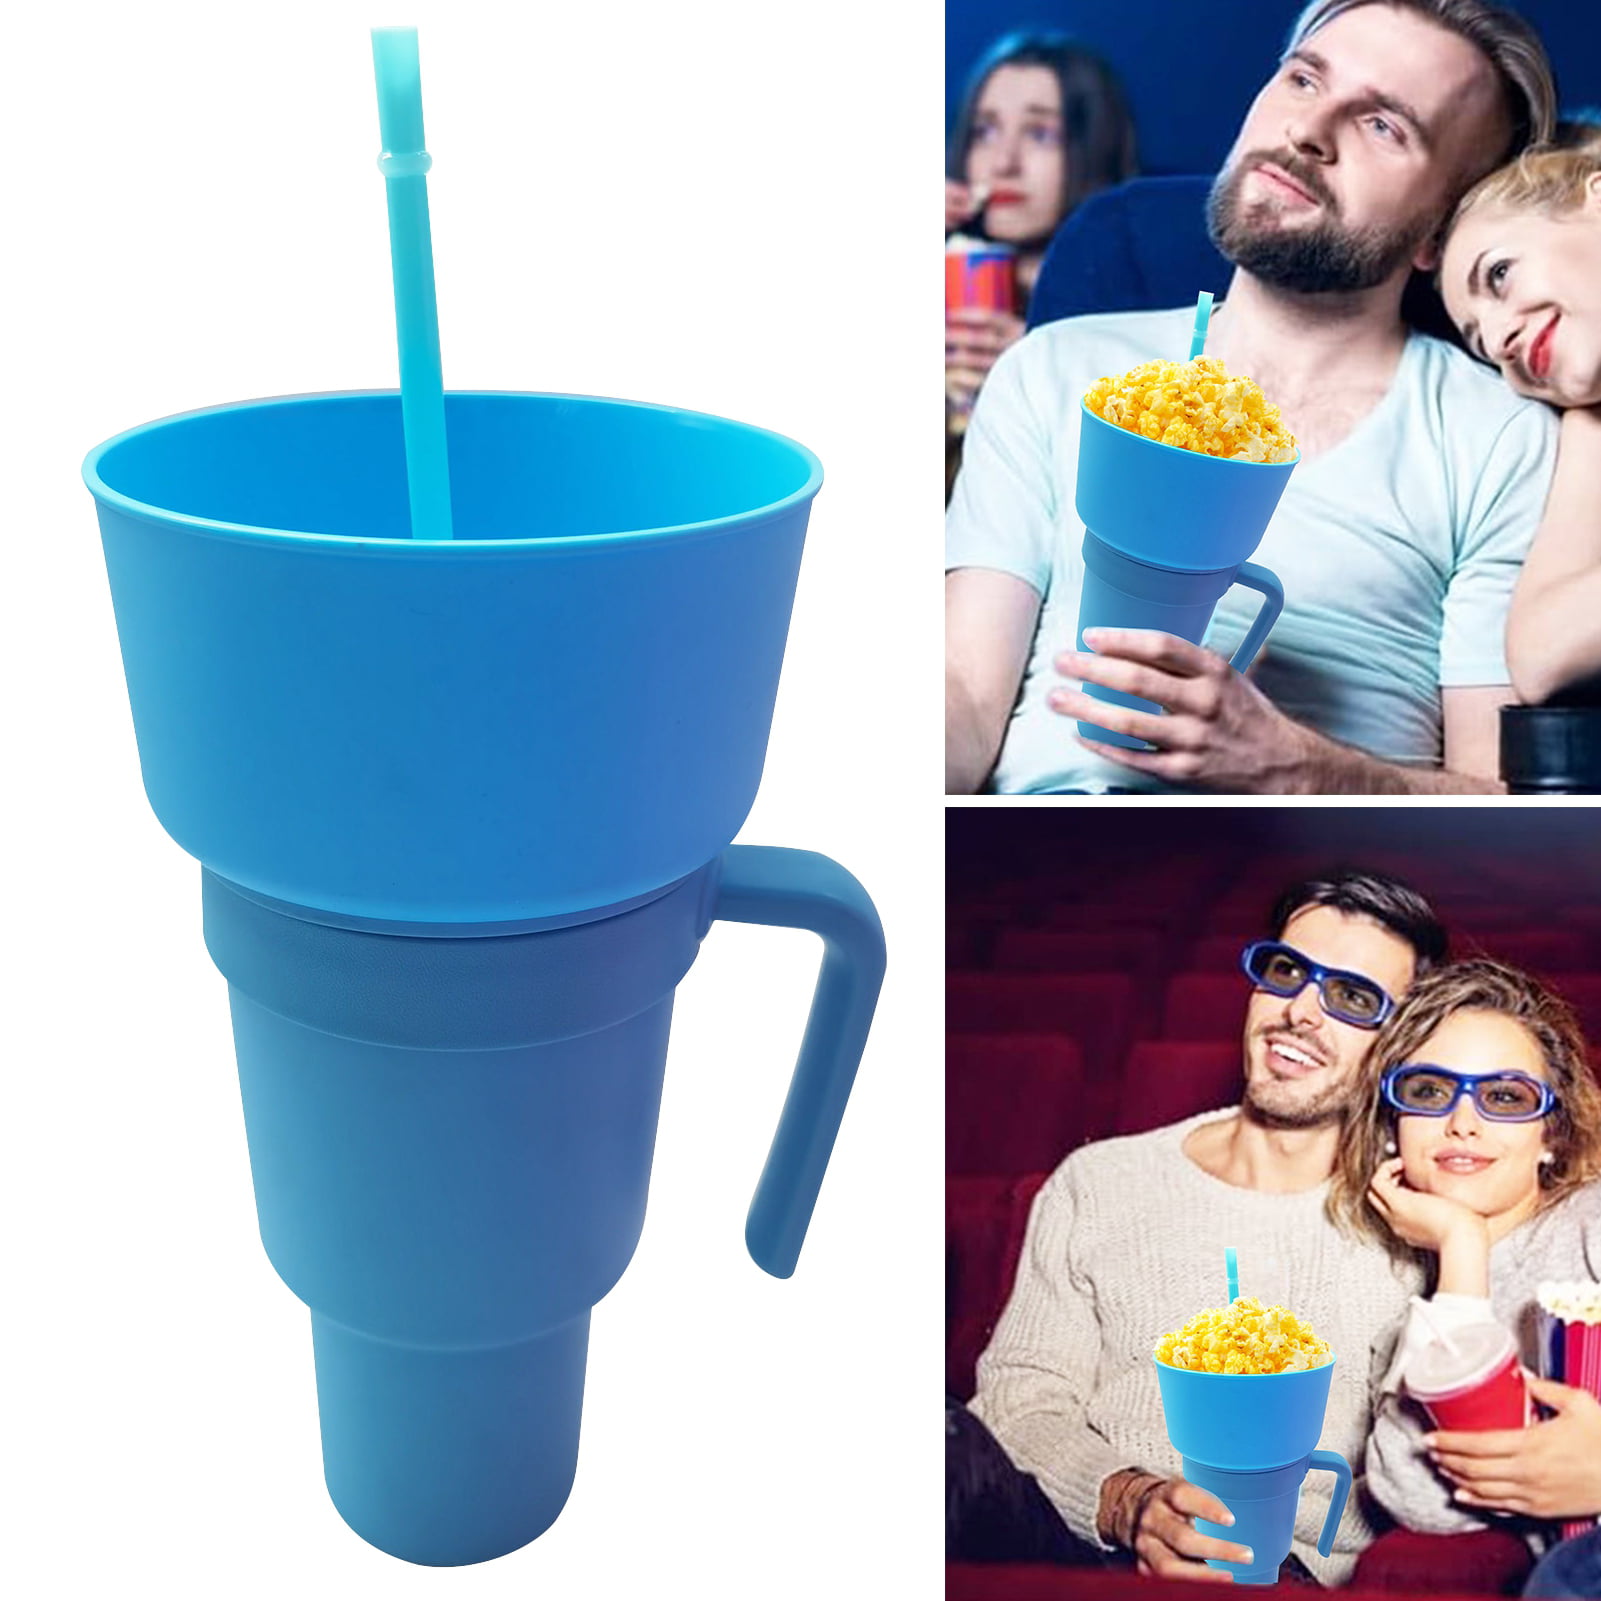  Large Opening 2 in 1 Snack Drink Cup with Straw